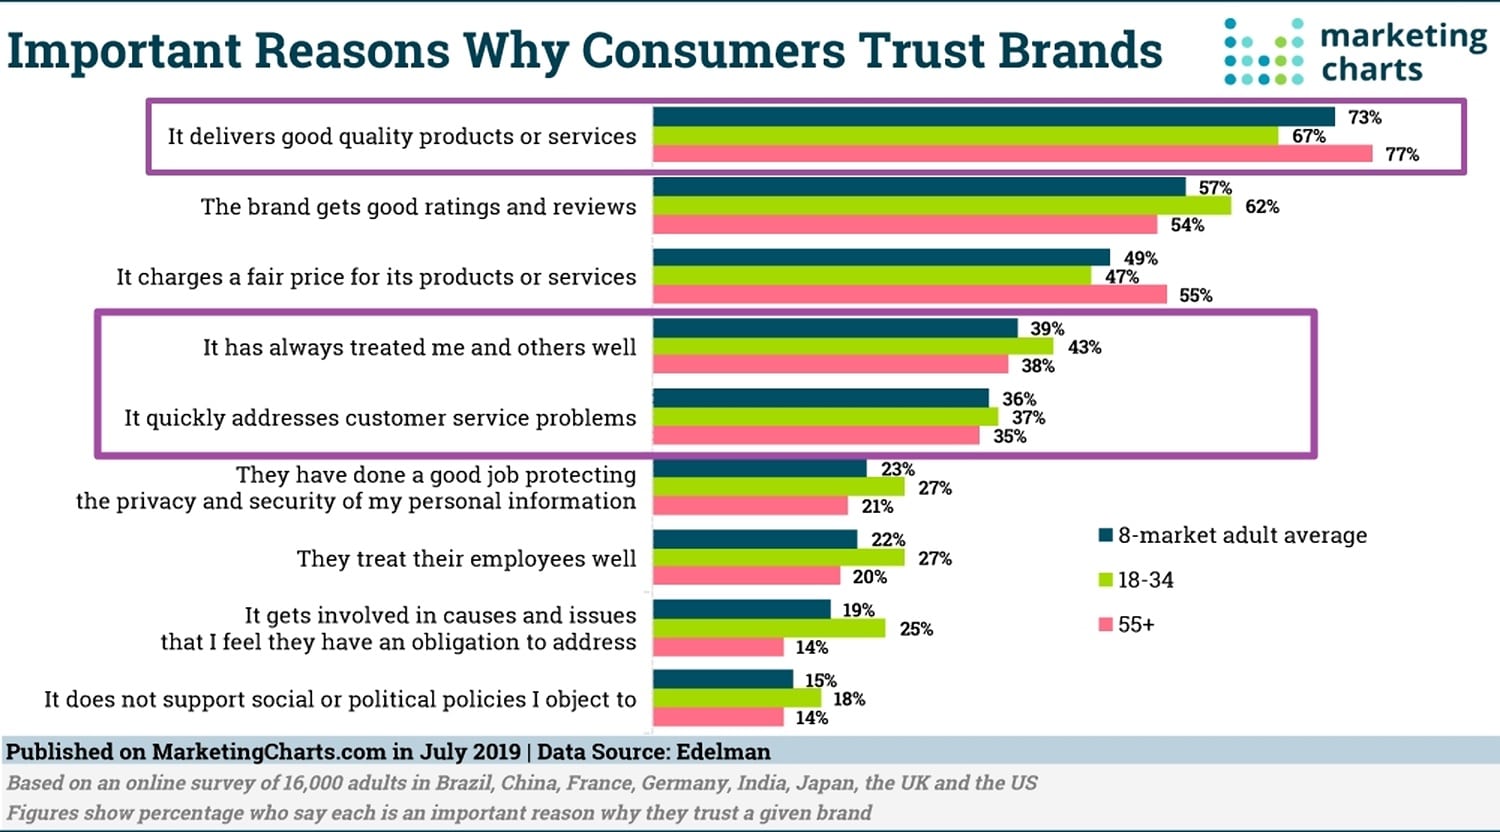 Important Reasons Why Consumers Trust Brands